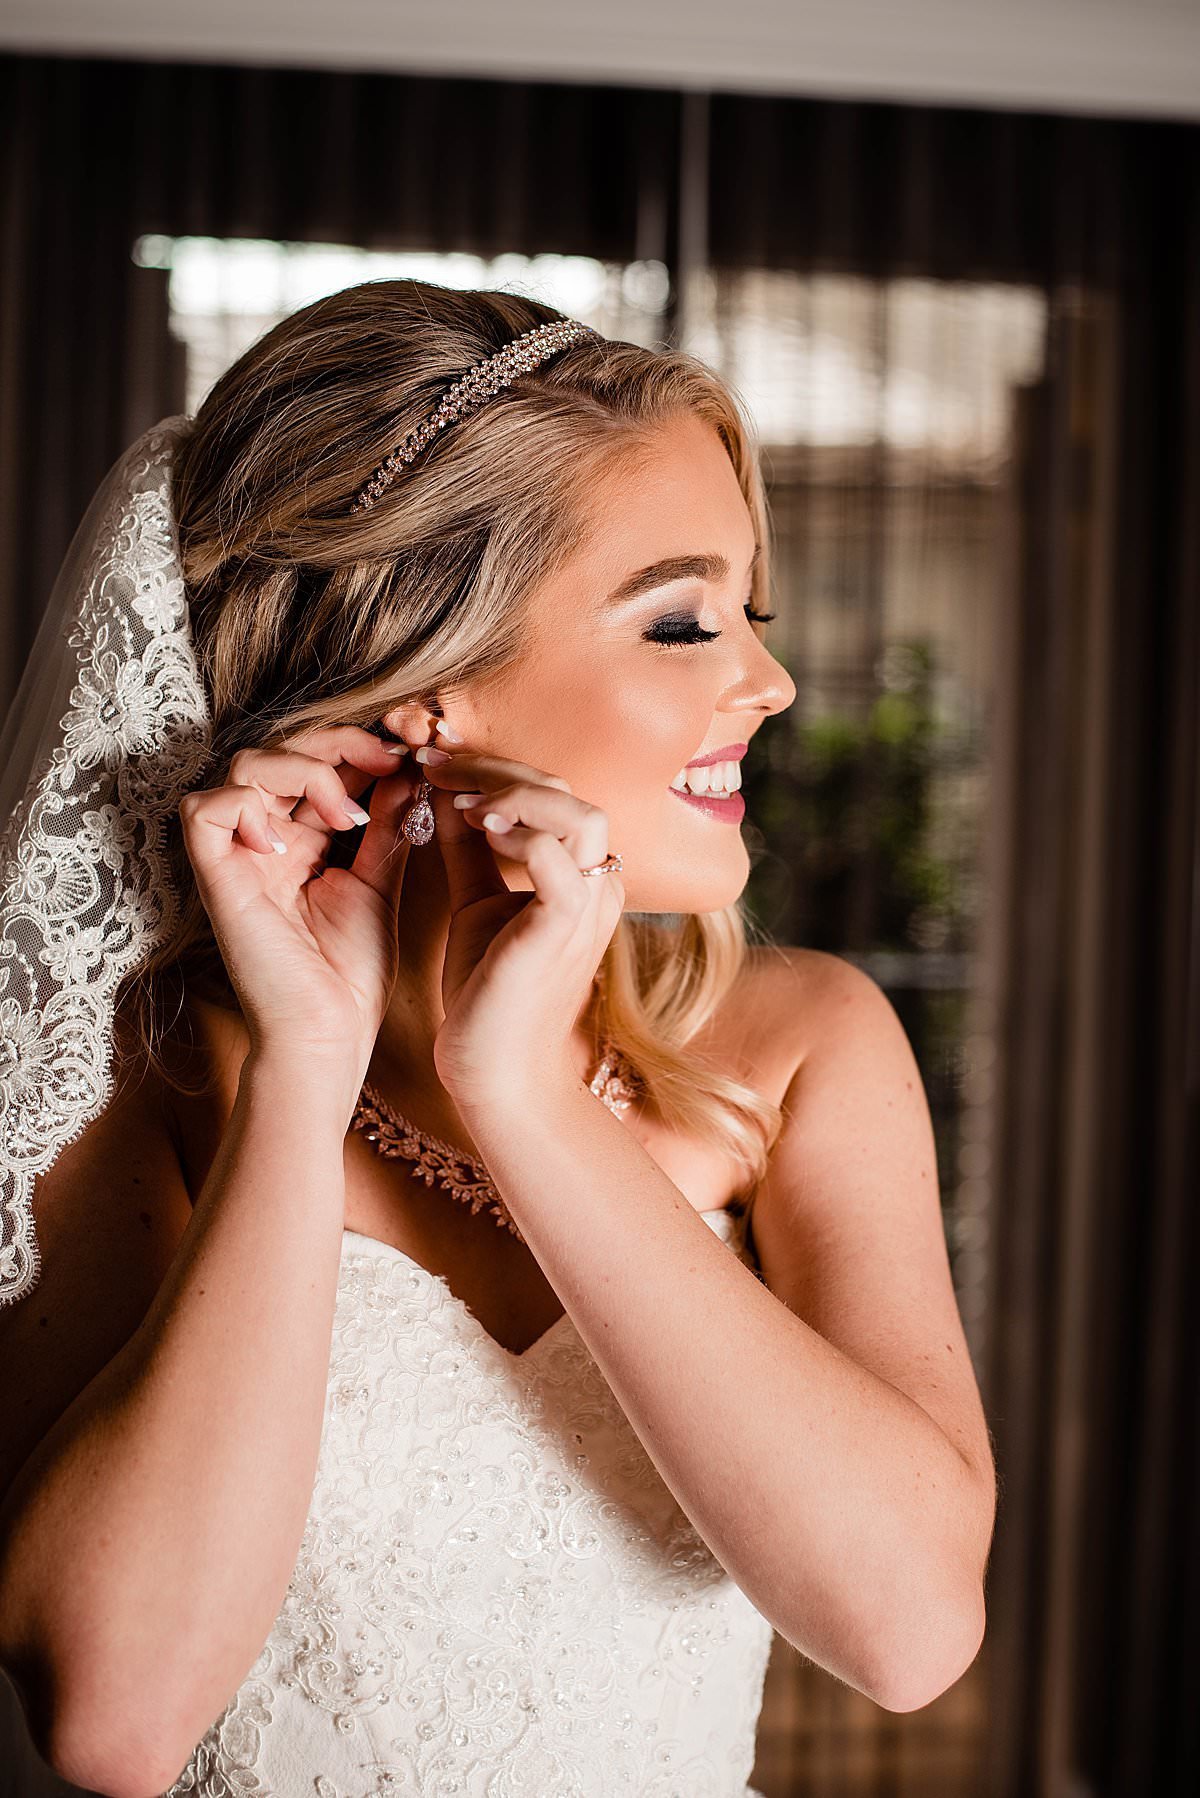 Bride smiling and putting her earrings in while getting ready